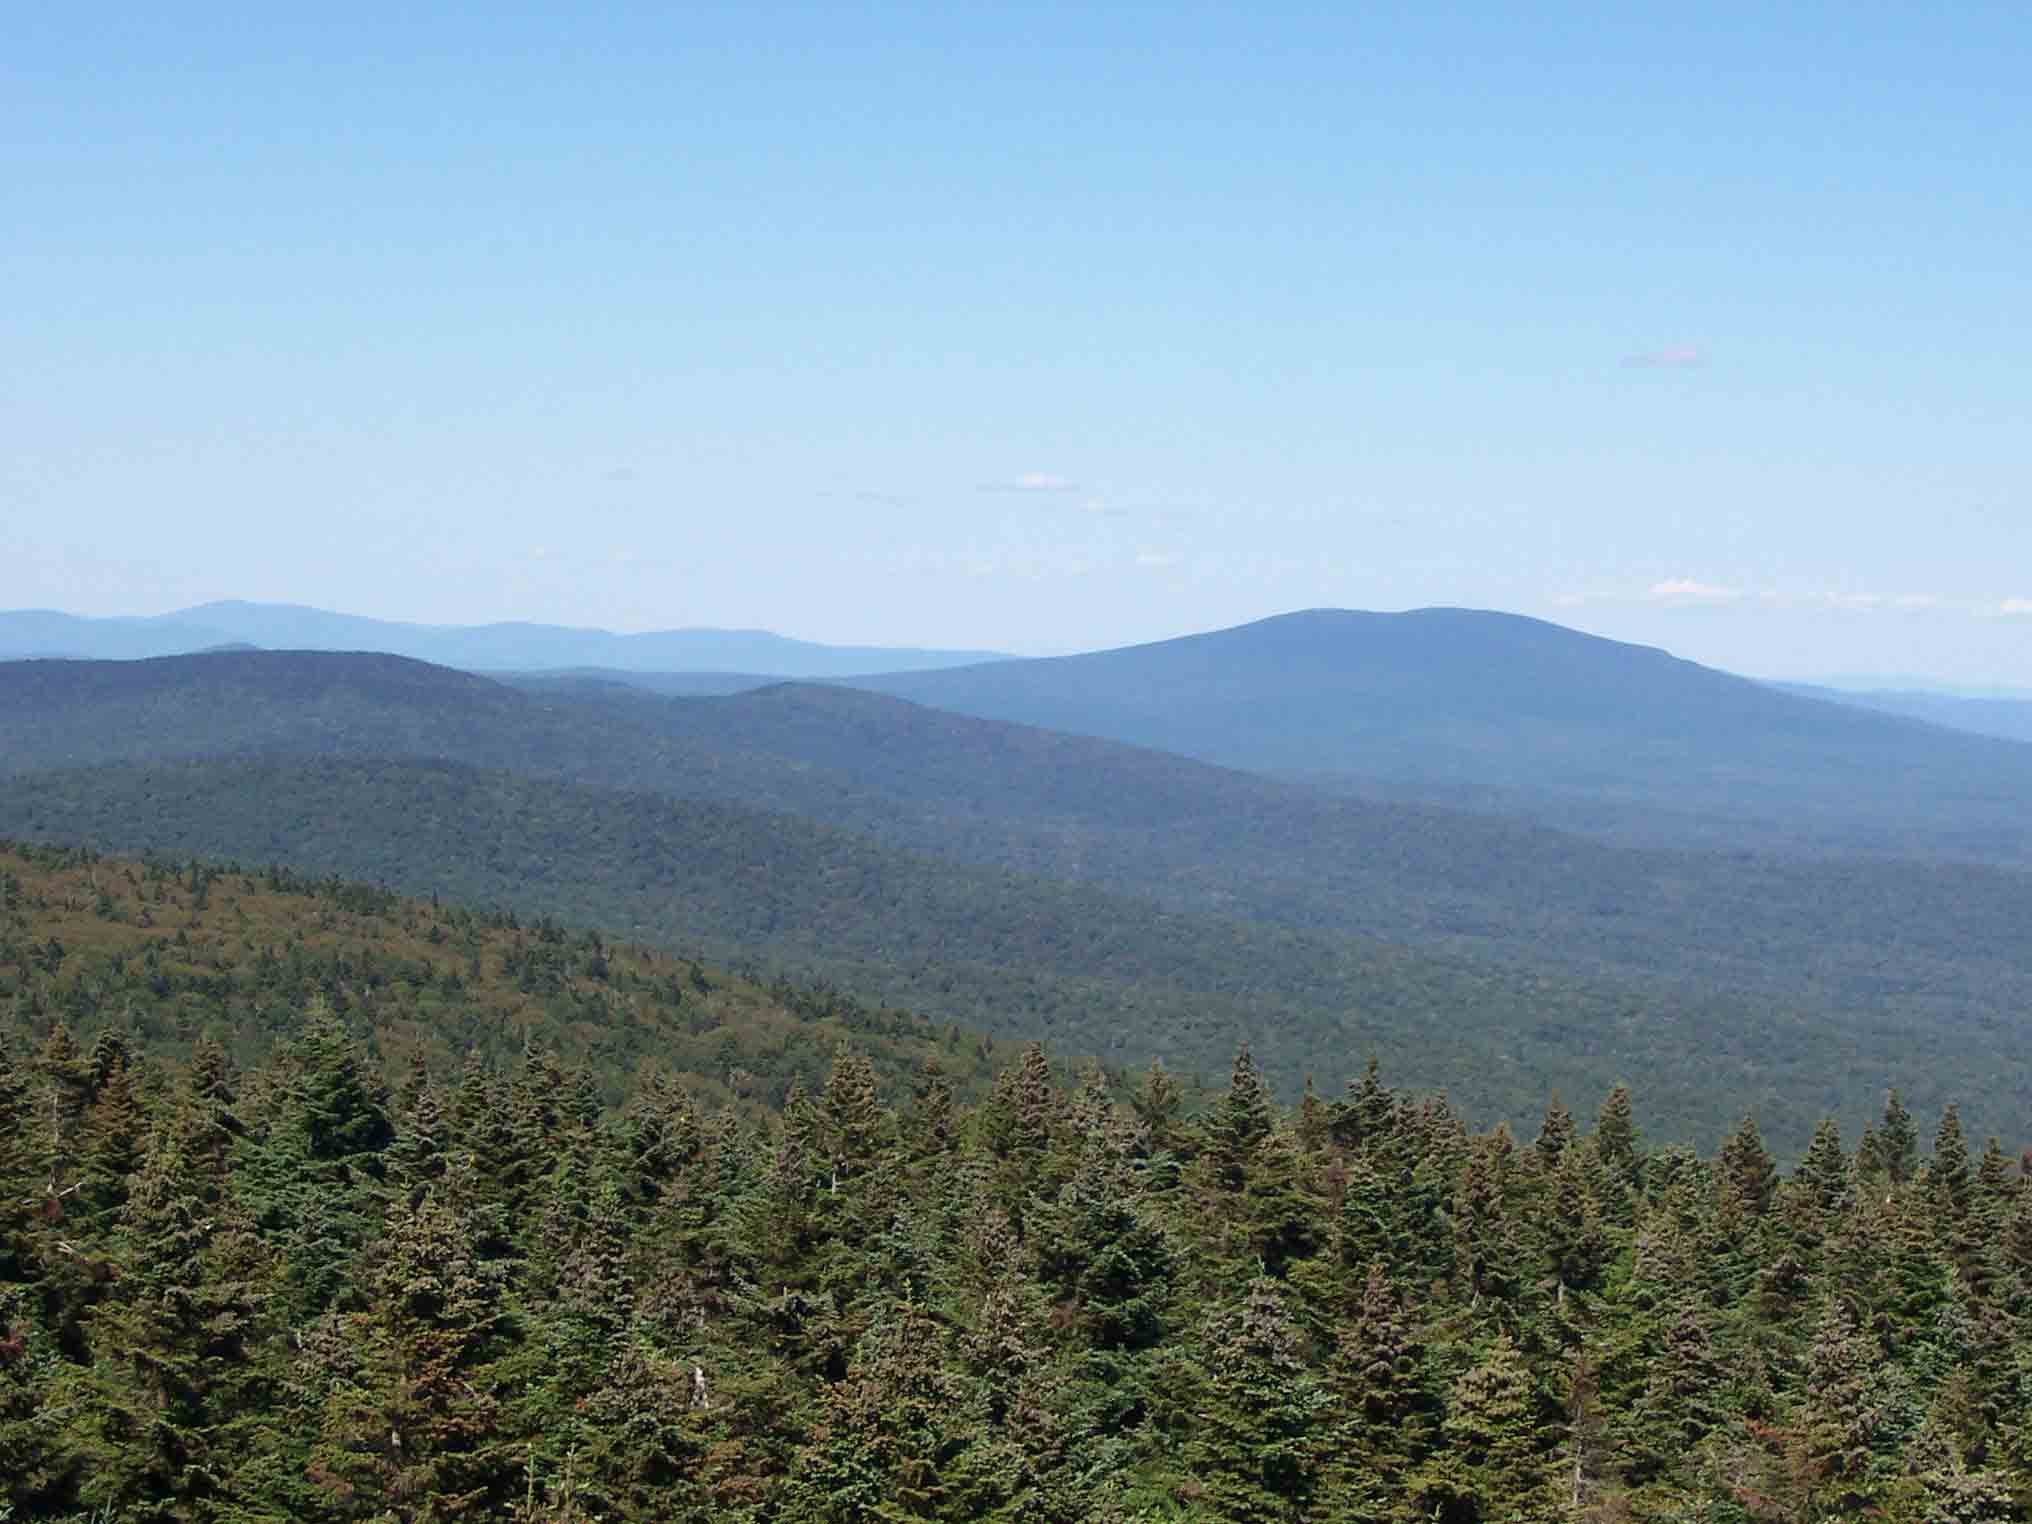 mm 12.2 - View north from firetower on Glastenbury Mt. The large moutain is Stratton. The northbound trail more or less follows the ridge on the left side of the picture then goes up and over the south peak of Stratton.    Courtesy dlcul@conncoll.edu